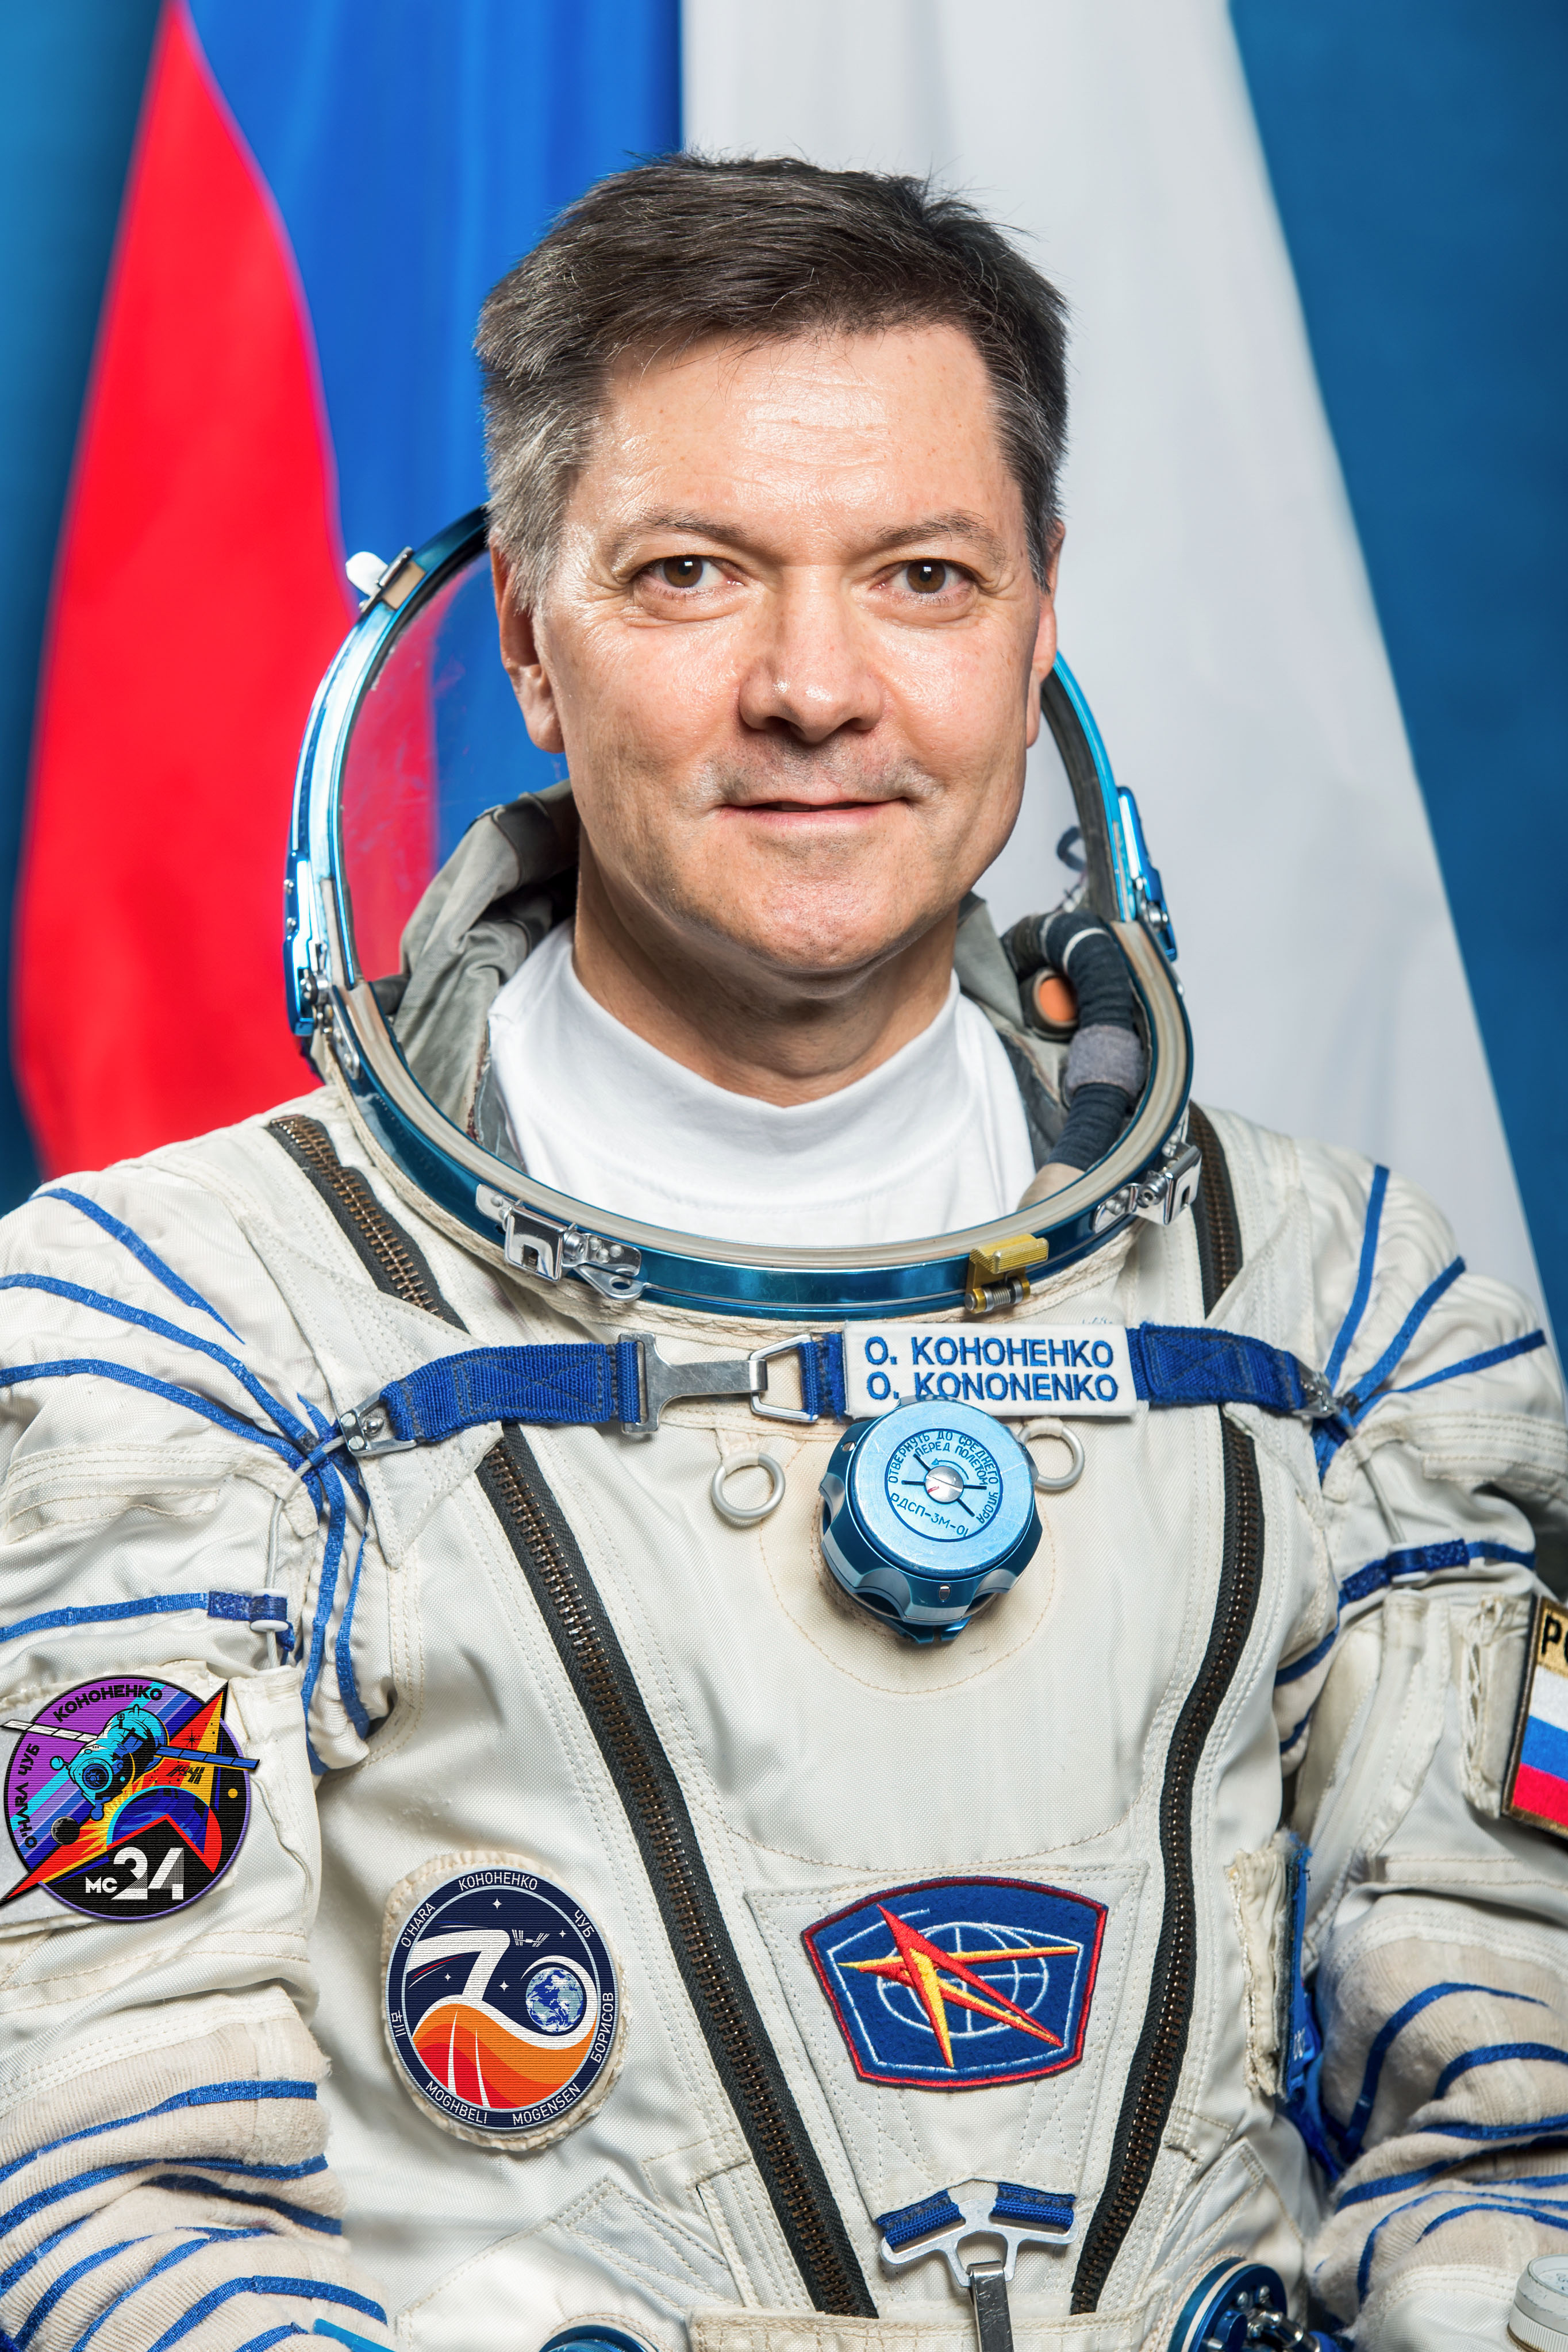 Roscosmos cosmonaut and Expedition 70 Flight Engineer, including Soyuz MS-24 Commander, Oleg Kononenko poses for a portrait at the Gagarin Cosmonaut Training Center in Russia.